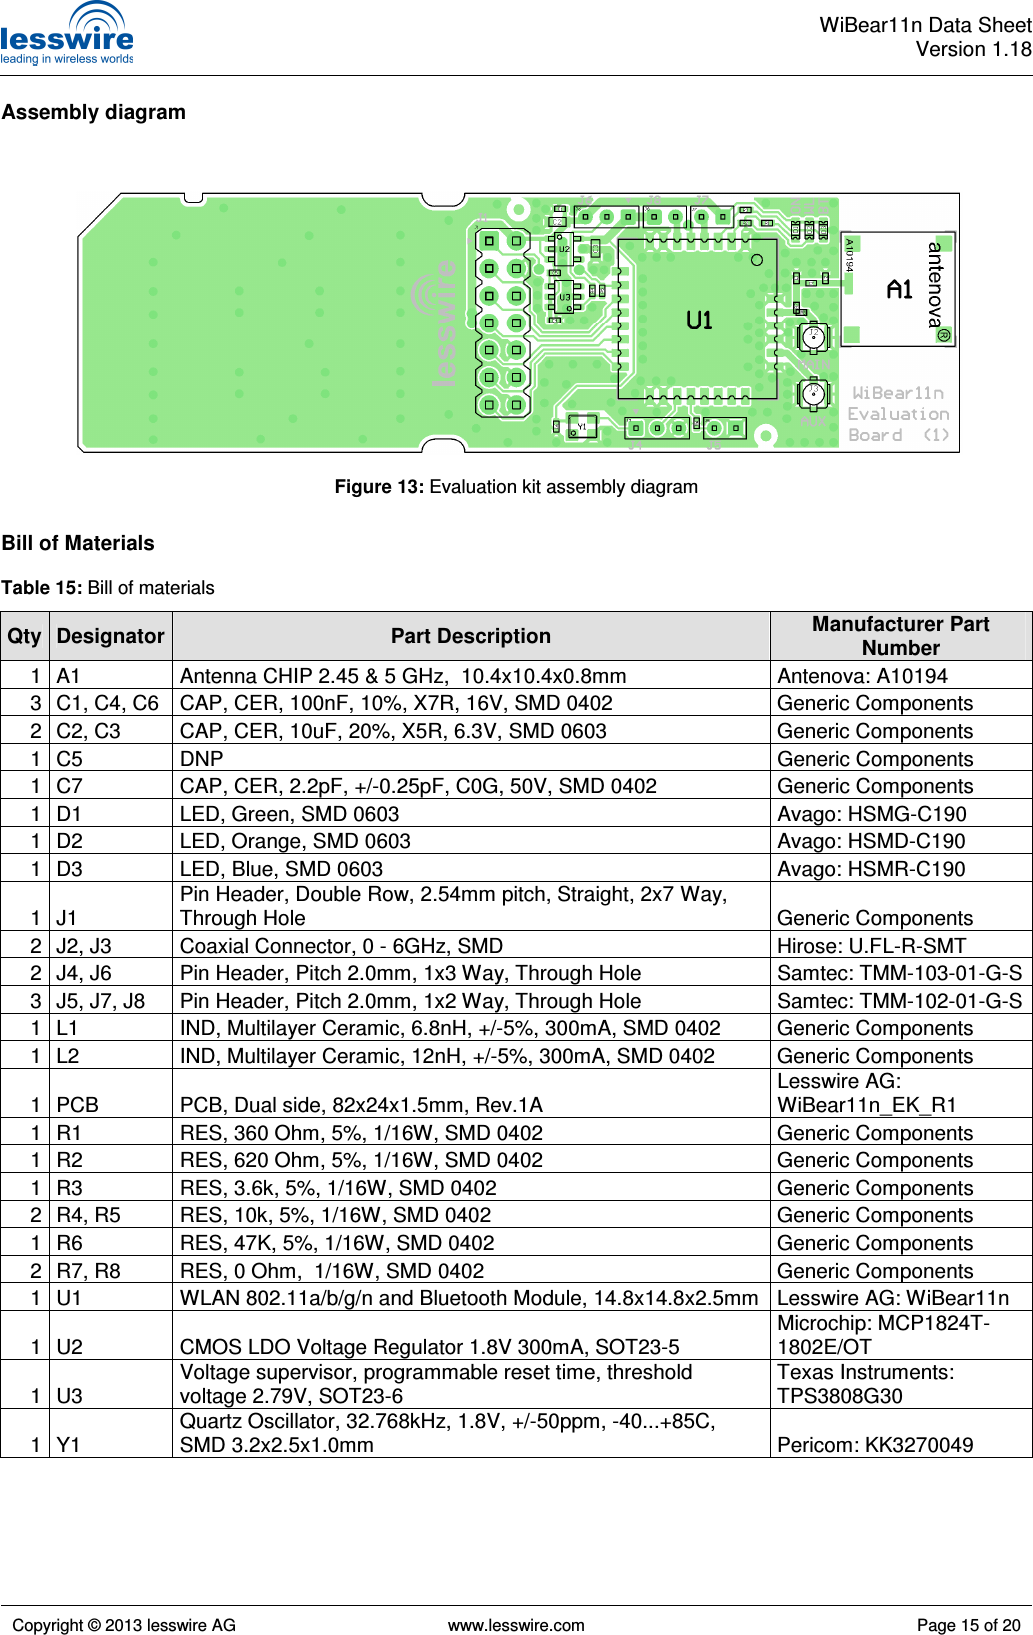  WiBear11n Data SheetVersion 1.18   Copyright © 2013 lesswire AG   www.lesswire.com  Page 15 of 20  Assembly diagram                  Bill of Materials  Table 15: Bill of materials Qty Designator Part Description  Manufacturer Part Number 1 A1  Antenna CHIP 2.45 &amp; 5 GHz,  10.4x10.4x0.8mm  Antenova: A10194 3 C1, C4, C6  CAP, CER, 100nF, 10%, X7R, 16V, SMD 0402  Generic Components 2 C2, C3  CAP, CER, 10uF, 20%, X5R, 6.3V, SMD 0603  Generic Components 1 C5  DNP  Generic Components 1 C7  CAP, CER, 2.2pF, +/-0.25pF, C0G, 50V, SMD 0402  Generic Components 1 D1  LED, Green, SMD 0603  Avago: HSMG-C190 1 D2  LED, Orange, SMD 0603  Avago: HSMD-C190 1 D3  LED, Blue, SMD 0603  Avago: HSMR-C190 1 J1 Pin Header, Double Row, 2.54mm pitch, Straight, 2x7 Way, Through Hole  Generic Components 2 J2, J3  Coaxial Connector, 0 - 6GHz, SMD  Hirose: U.FL-R-SMT 2 J4, J6  Pin Header, Pitch 2.0mm, 1x3 Way, Through Hole  Samtec: TMM-103-01-G-S 3 J5, J7, J8  Pin Header, Pitch 2.0mm, 1x2 Way, Through Hole  Samtec: TMM-102-01-G-S 1 L1  IND, Multilayer Ceramic, 6.8nH, +/-5%, 300mA, SMD 0402  Generic Components 1 L2  IND, Multilayer Ceramic, 12nH, +/-5%, 300mA, SMD 0402  Generic Components 1 PCB  PCB, Dual side, 82x24x1.5mm, Rev.1A Lesswire AG: WiBear11n_EK_R1 1 R1  RES, 360 Ohm, 5%, 1/16W, SMD 0402  Generic Components 1 R2  RES, 620 Ohm, 5%, 1/16W, SMD 0402  Generic Components 1 R3  RES, 3.6k, 5%, 1/16W, SMD 0402  Generic Components 2 R4, R5  RES, 10k, 5%, 1/16W, SMD 0402  Generic Components 1 R6  RES, 47K, 5%, 1/16W, SMD 0402  Generic Components 2 R7, R8  RES, 0 Ohm,  1/16W, SMD 0402  Generic Components 1 U1  WLAN 802.11a/b/g/n and Bluetooth Module, 14.8x14.8x2.5mm Lesswire AG: WiBear11n 1 U2  CMOS LDO Voltage Regulator 1.8V 300mA, SOT23-5 Microchip: MCP1824T-1802E/OT 1 U3 Voltage supervisor, programmable reset time, threshold voltage 2.79V, SOT23-6 Texas Instruments: TPS3808G30 1 Y1 Quartz Oscillator, 32.768kHz, 1.8V, +/-50ppm, -40...+85C, SMD 3.2x2.5x1.0mm  Pericom: KK3270049 Figure 13: Evaluation kit assembly diagram 